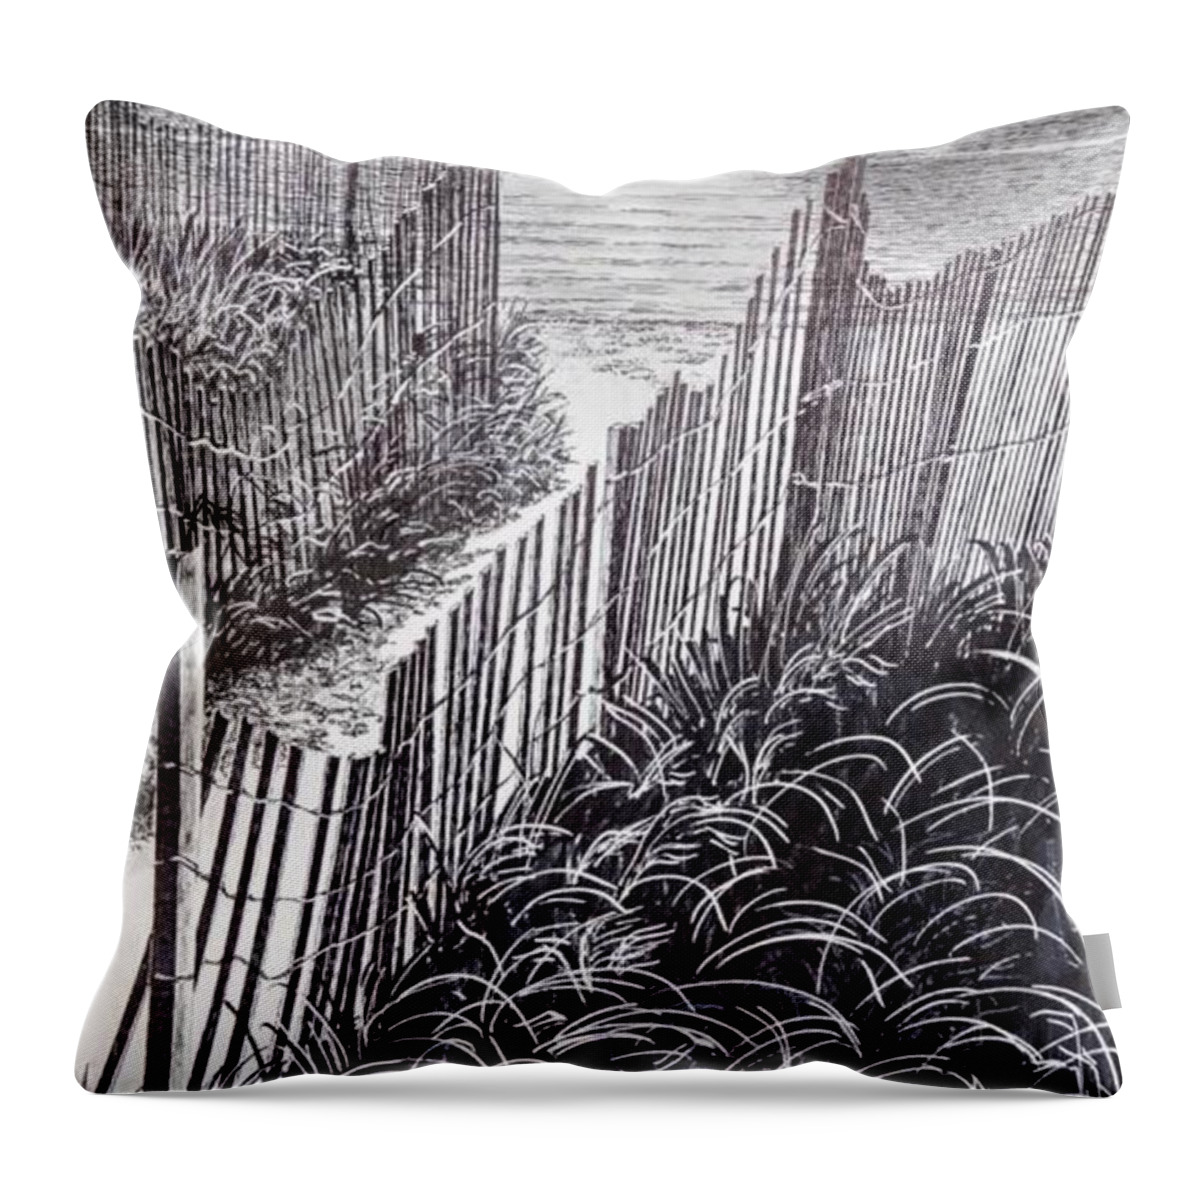 Pen And Ink Throw Pillow featuring the drawing Beach Path by Betsy Carlson Cross